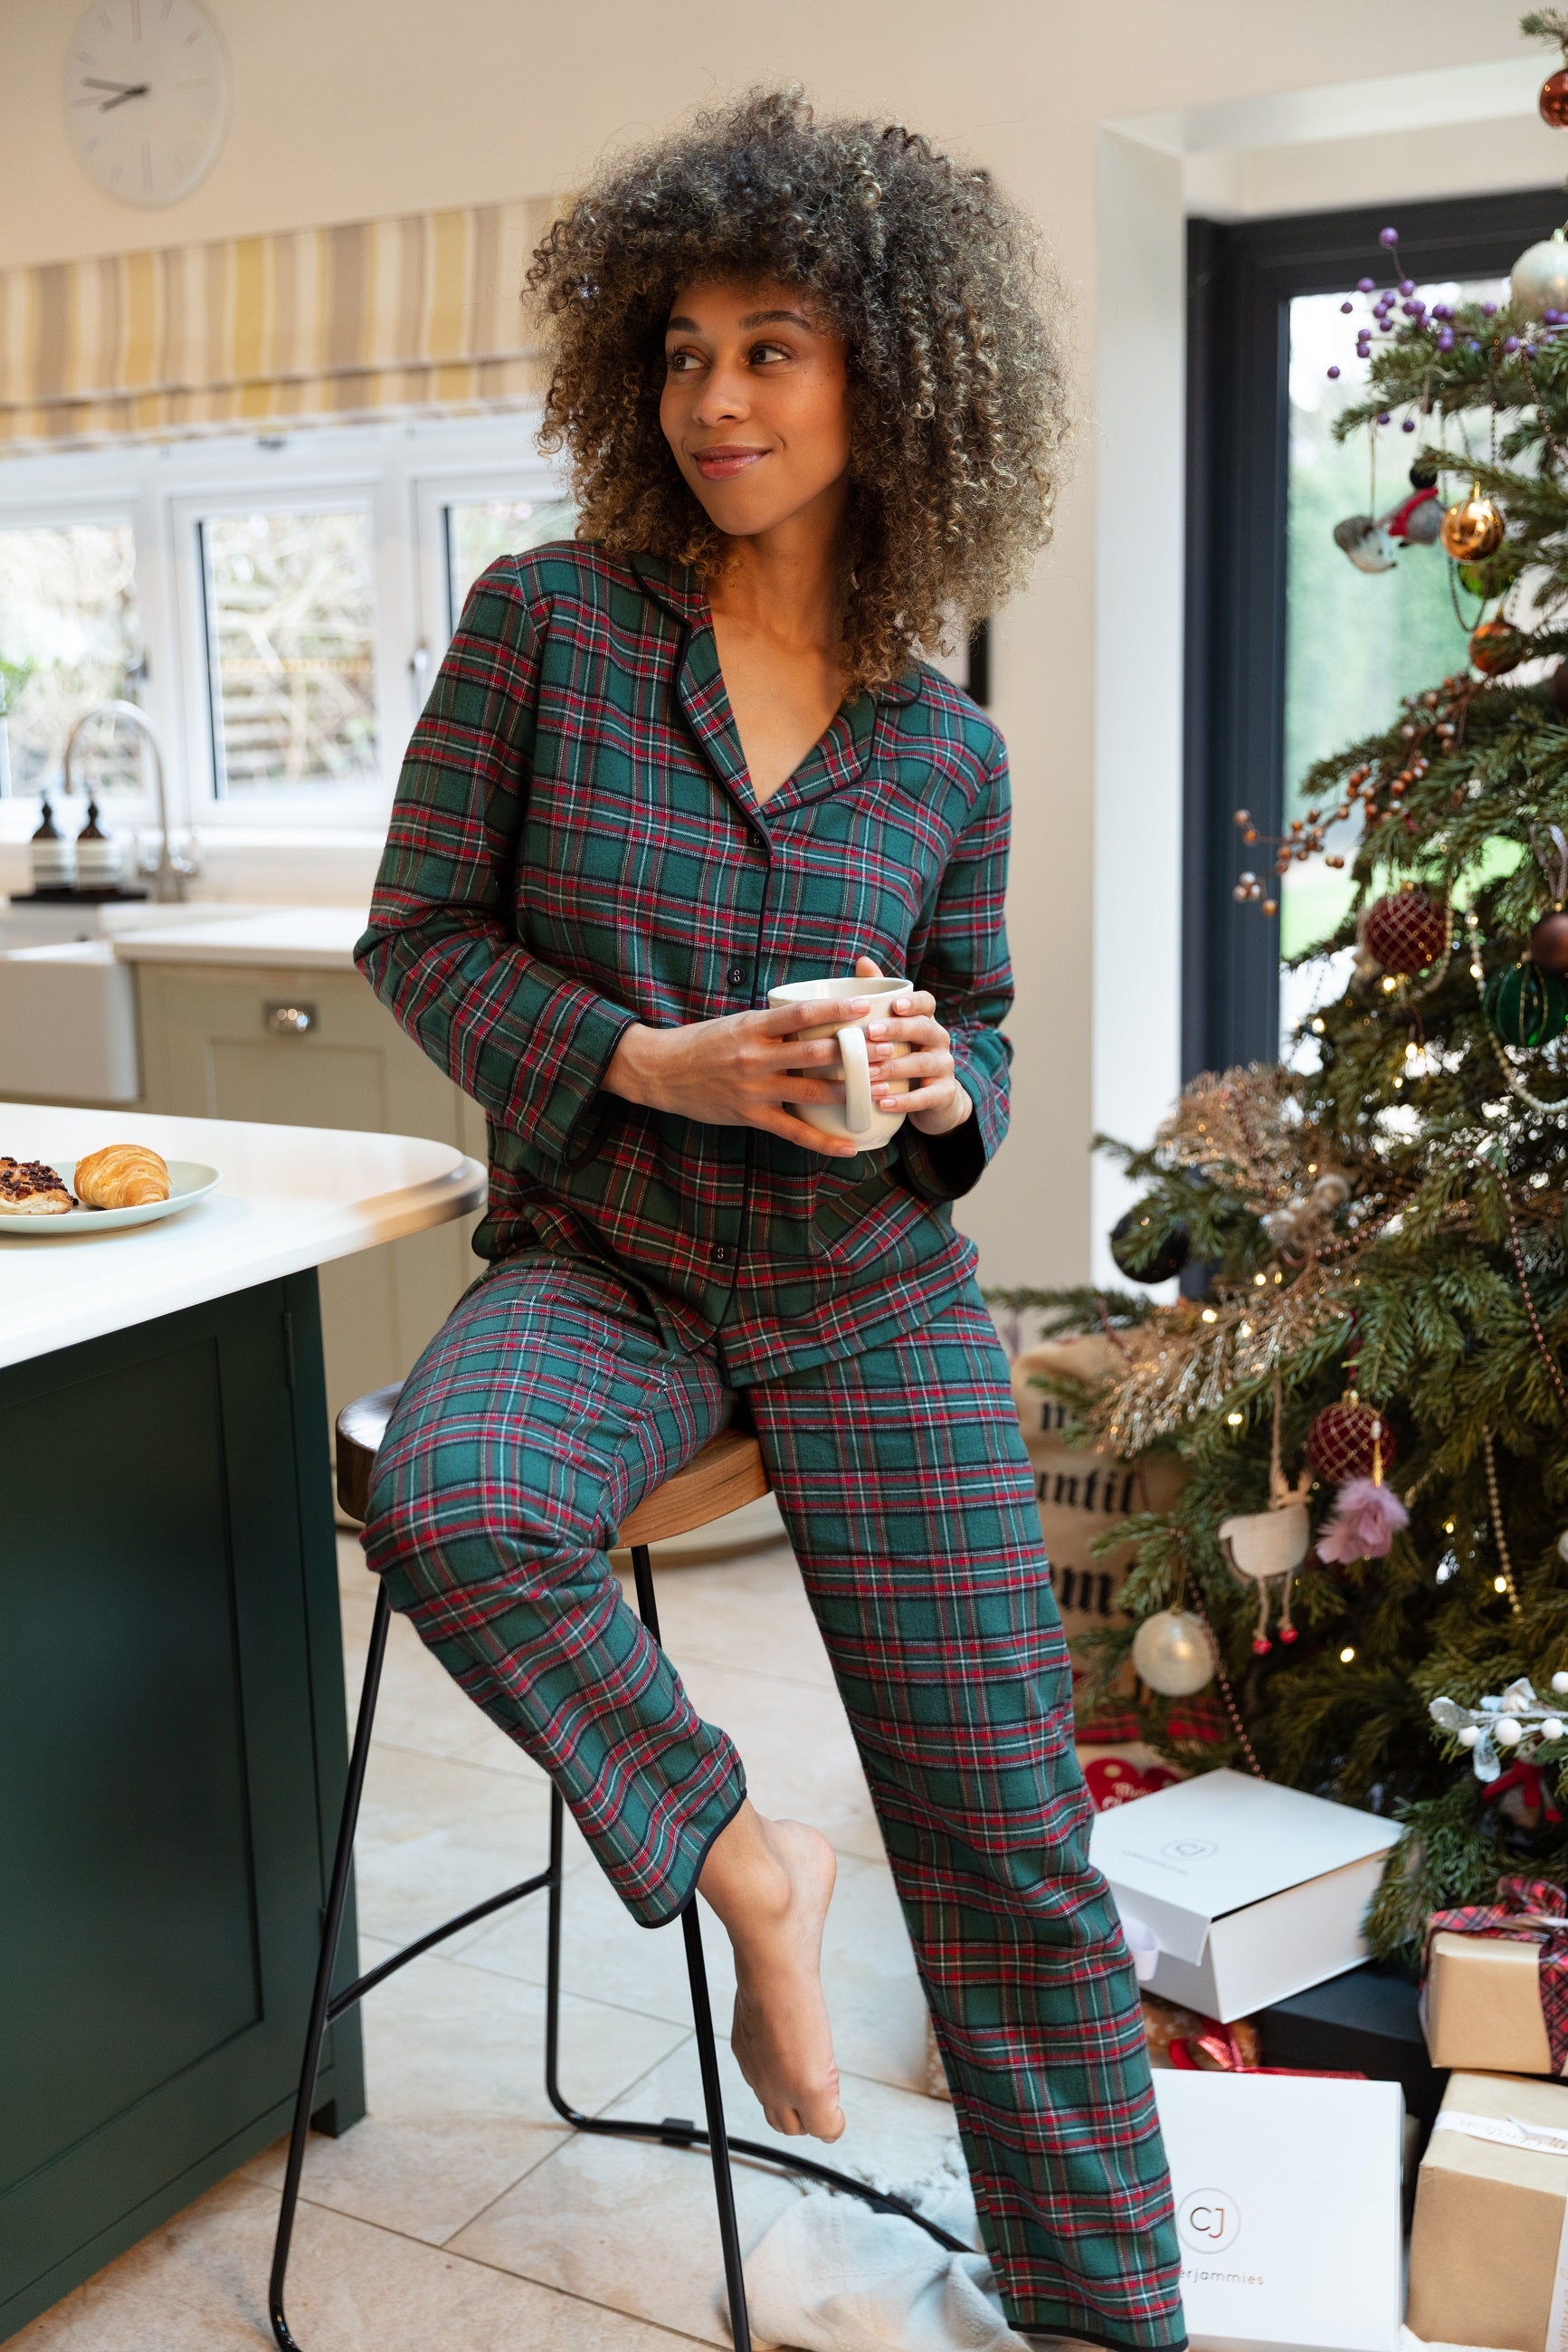 Cyberjammies 'Whistler' Green & Red Check Brushed Cotton Pyjama